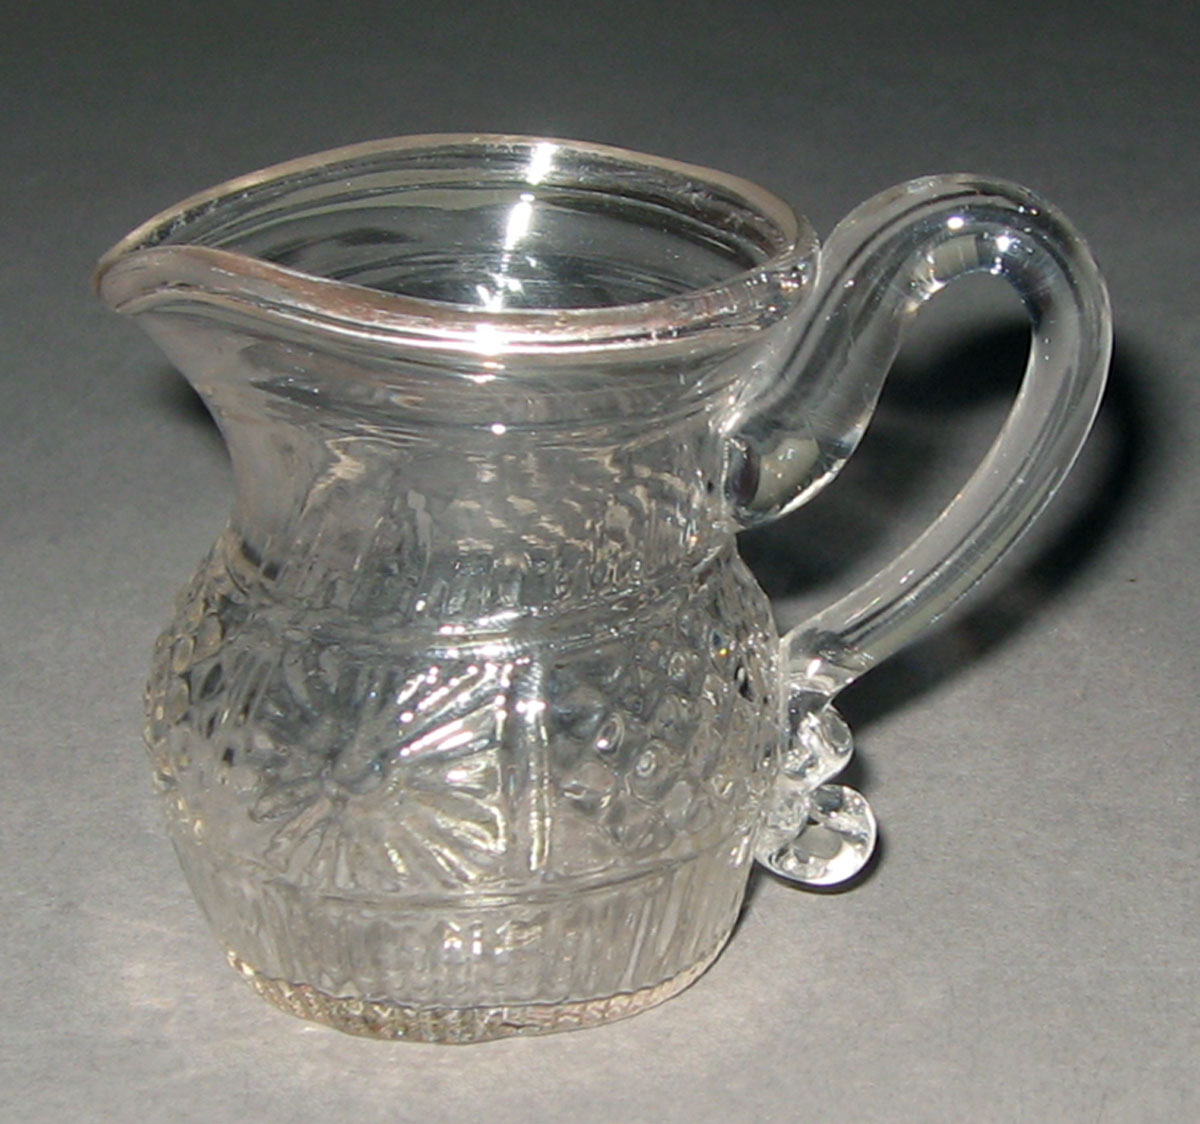 1959.3310 Mold-blown colorless glass jug